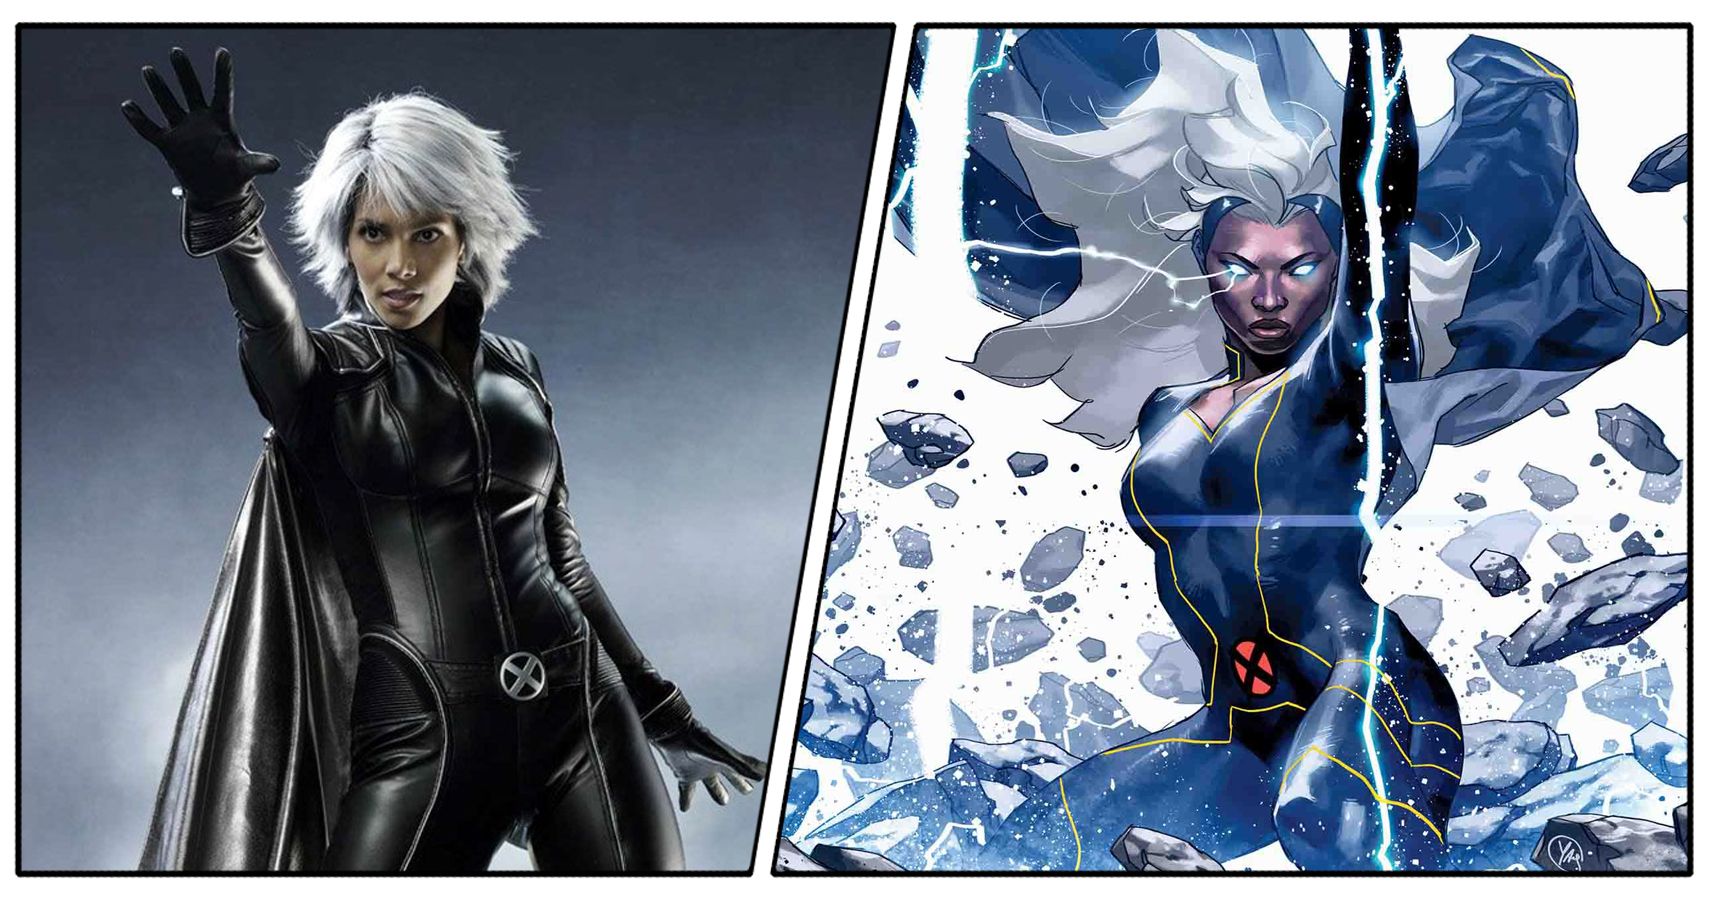 X Men 4 Times Halle Berry S Storm Was Comics Accurate 6 Times She Wasn T